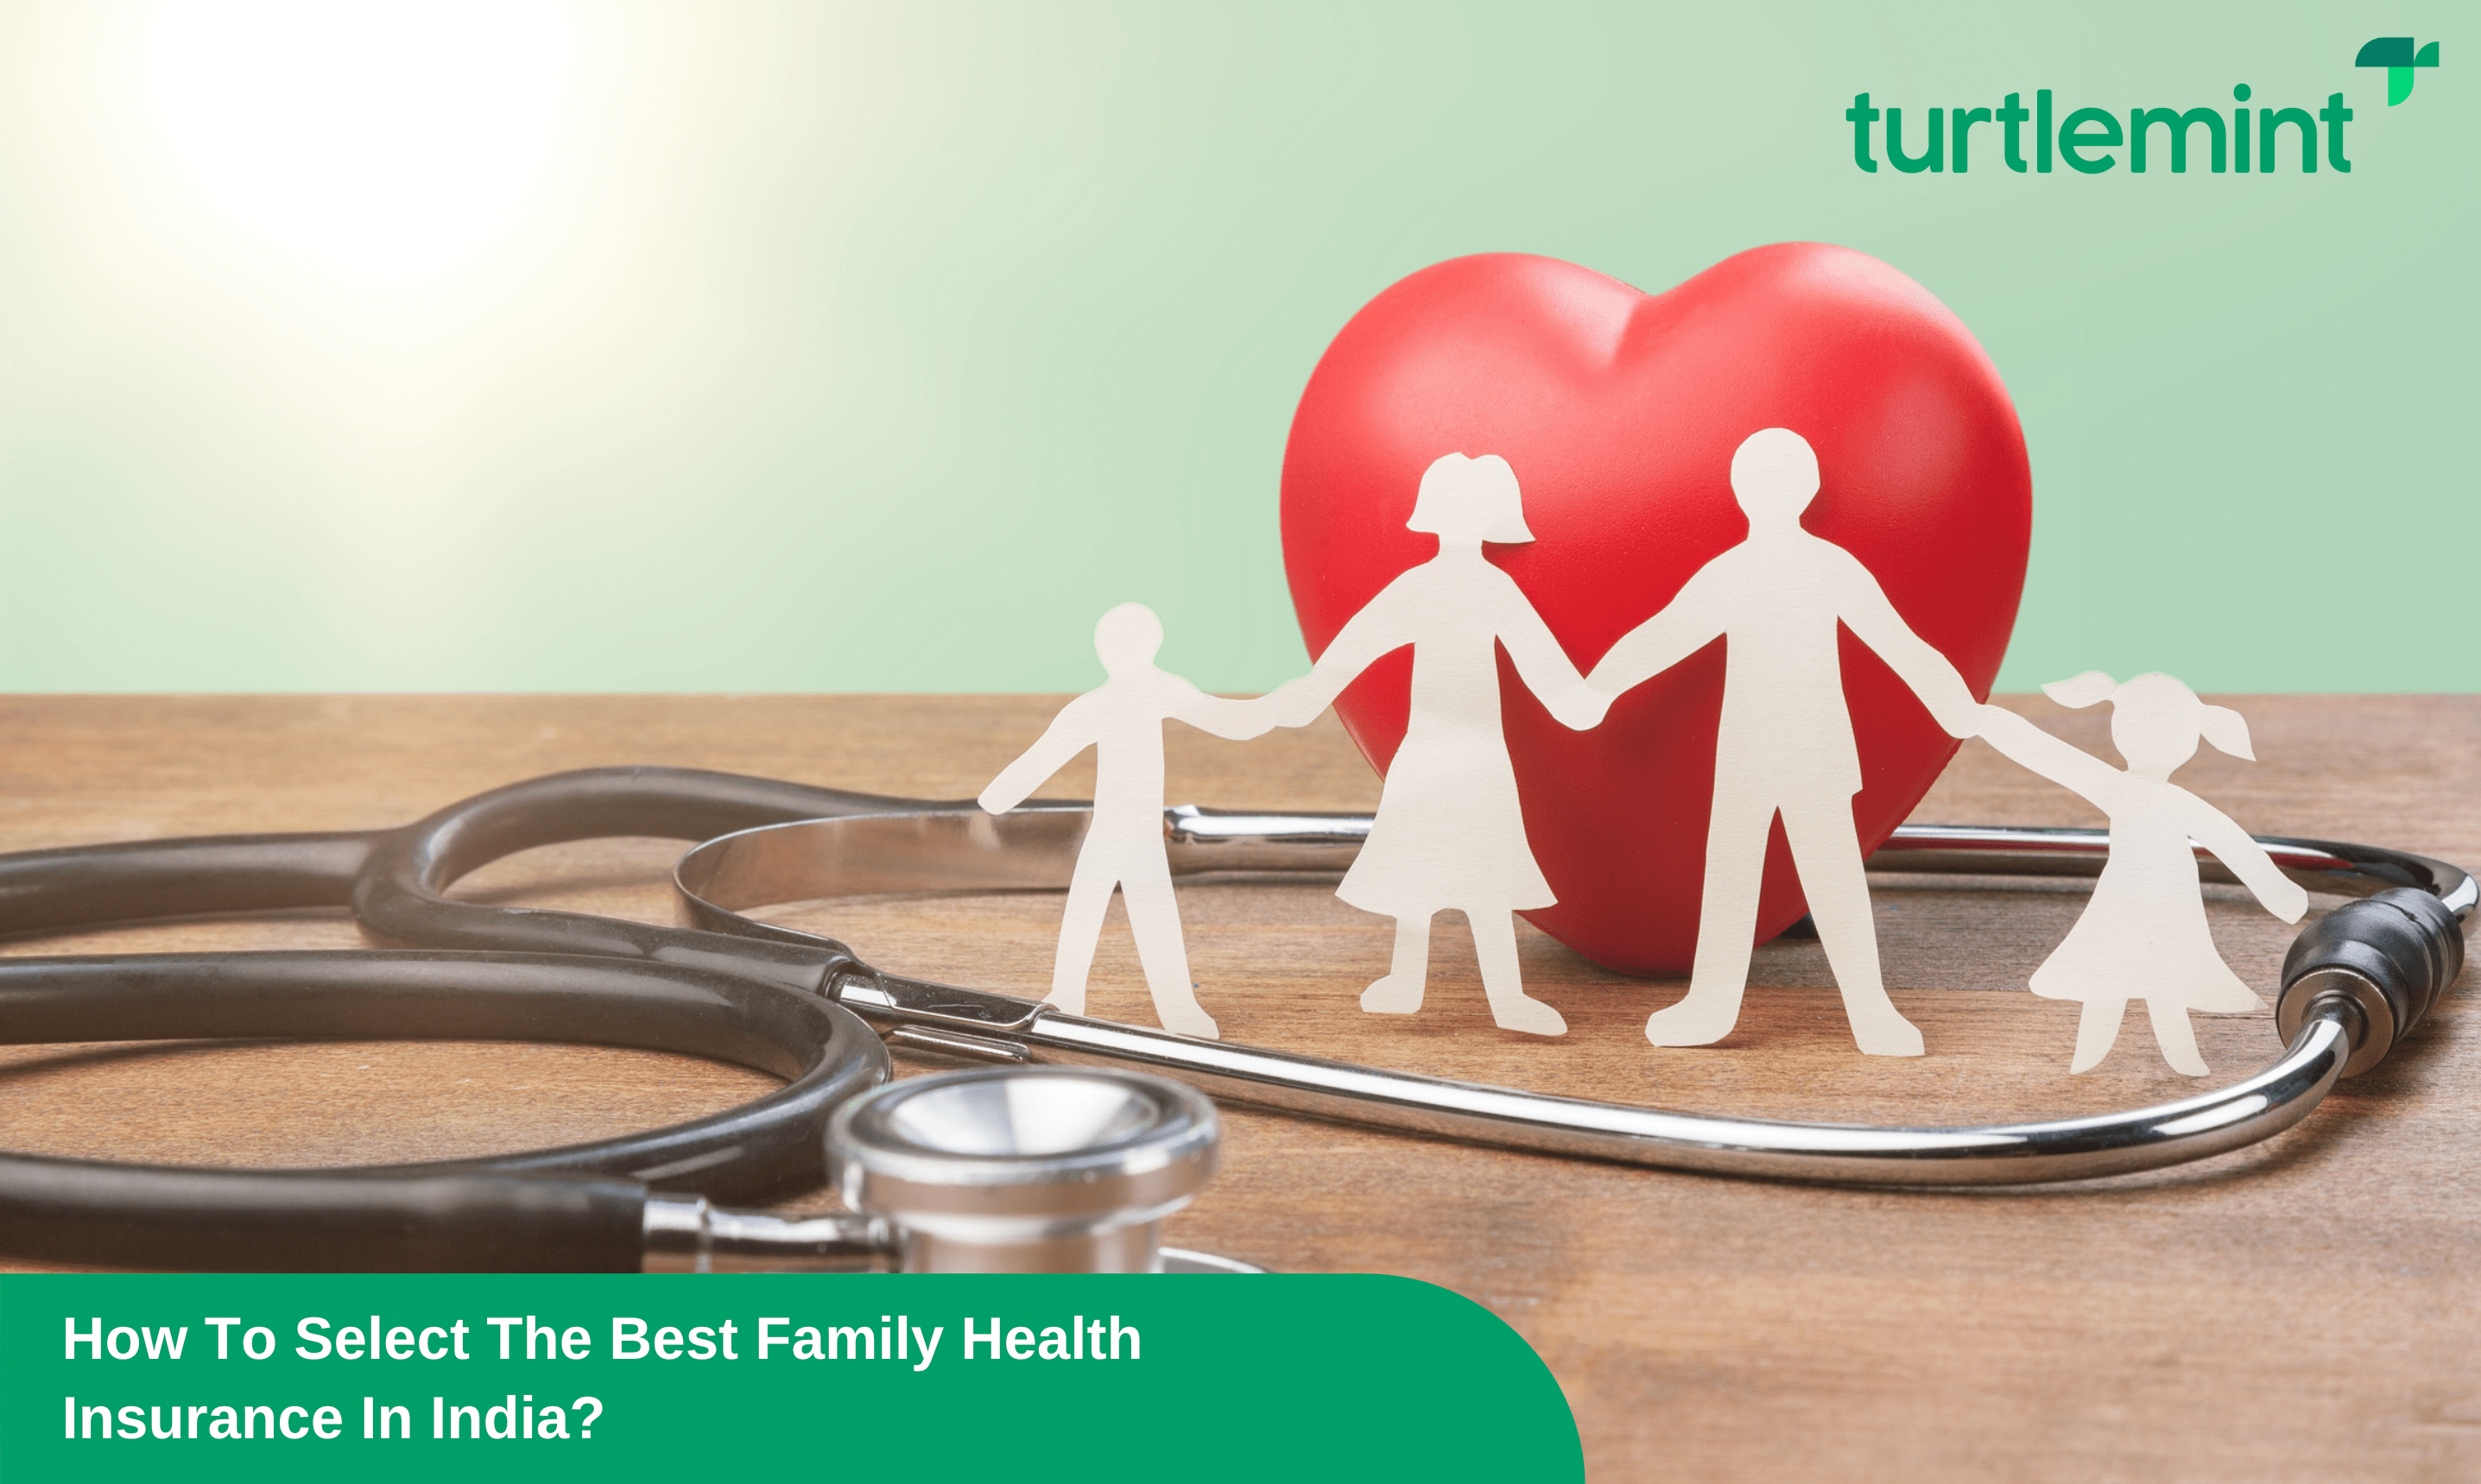 How To Select The Best Family Health Insurance In India?